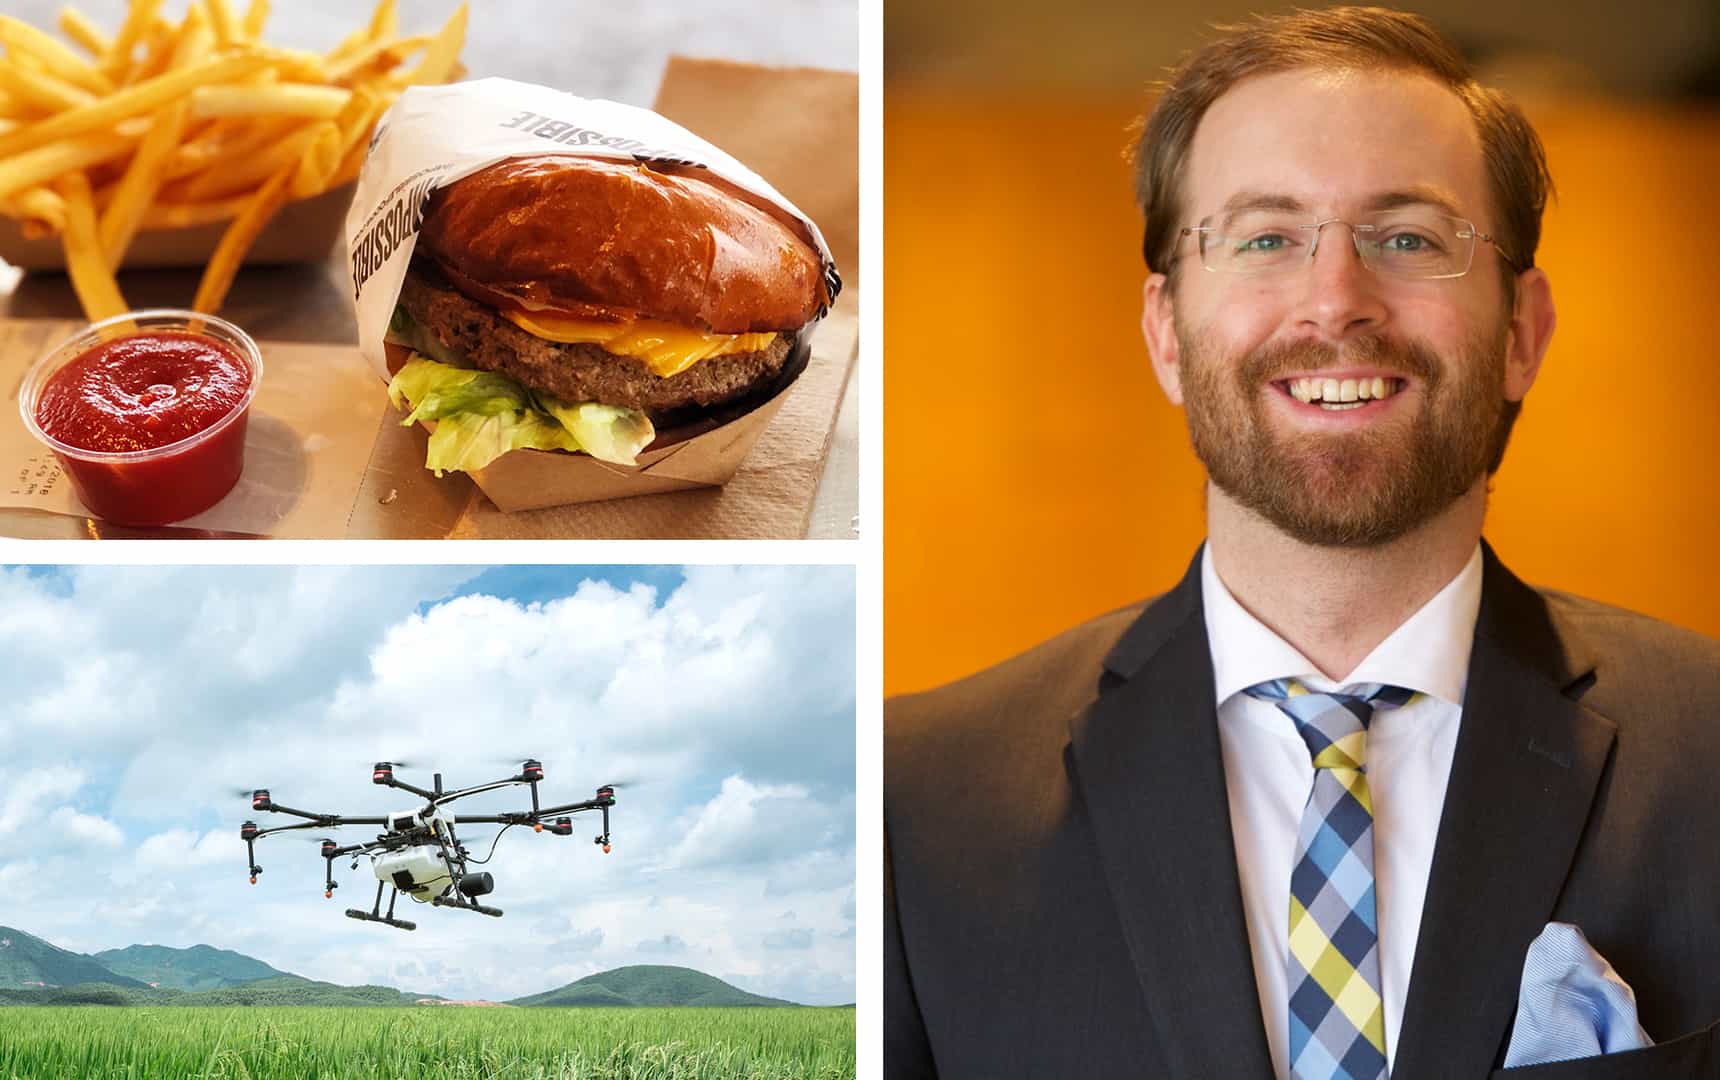 🍔 From plant burgers that bleed to agricultural drones - this is FoodTech